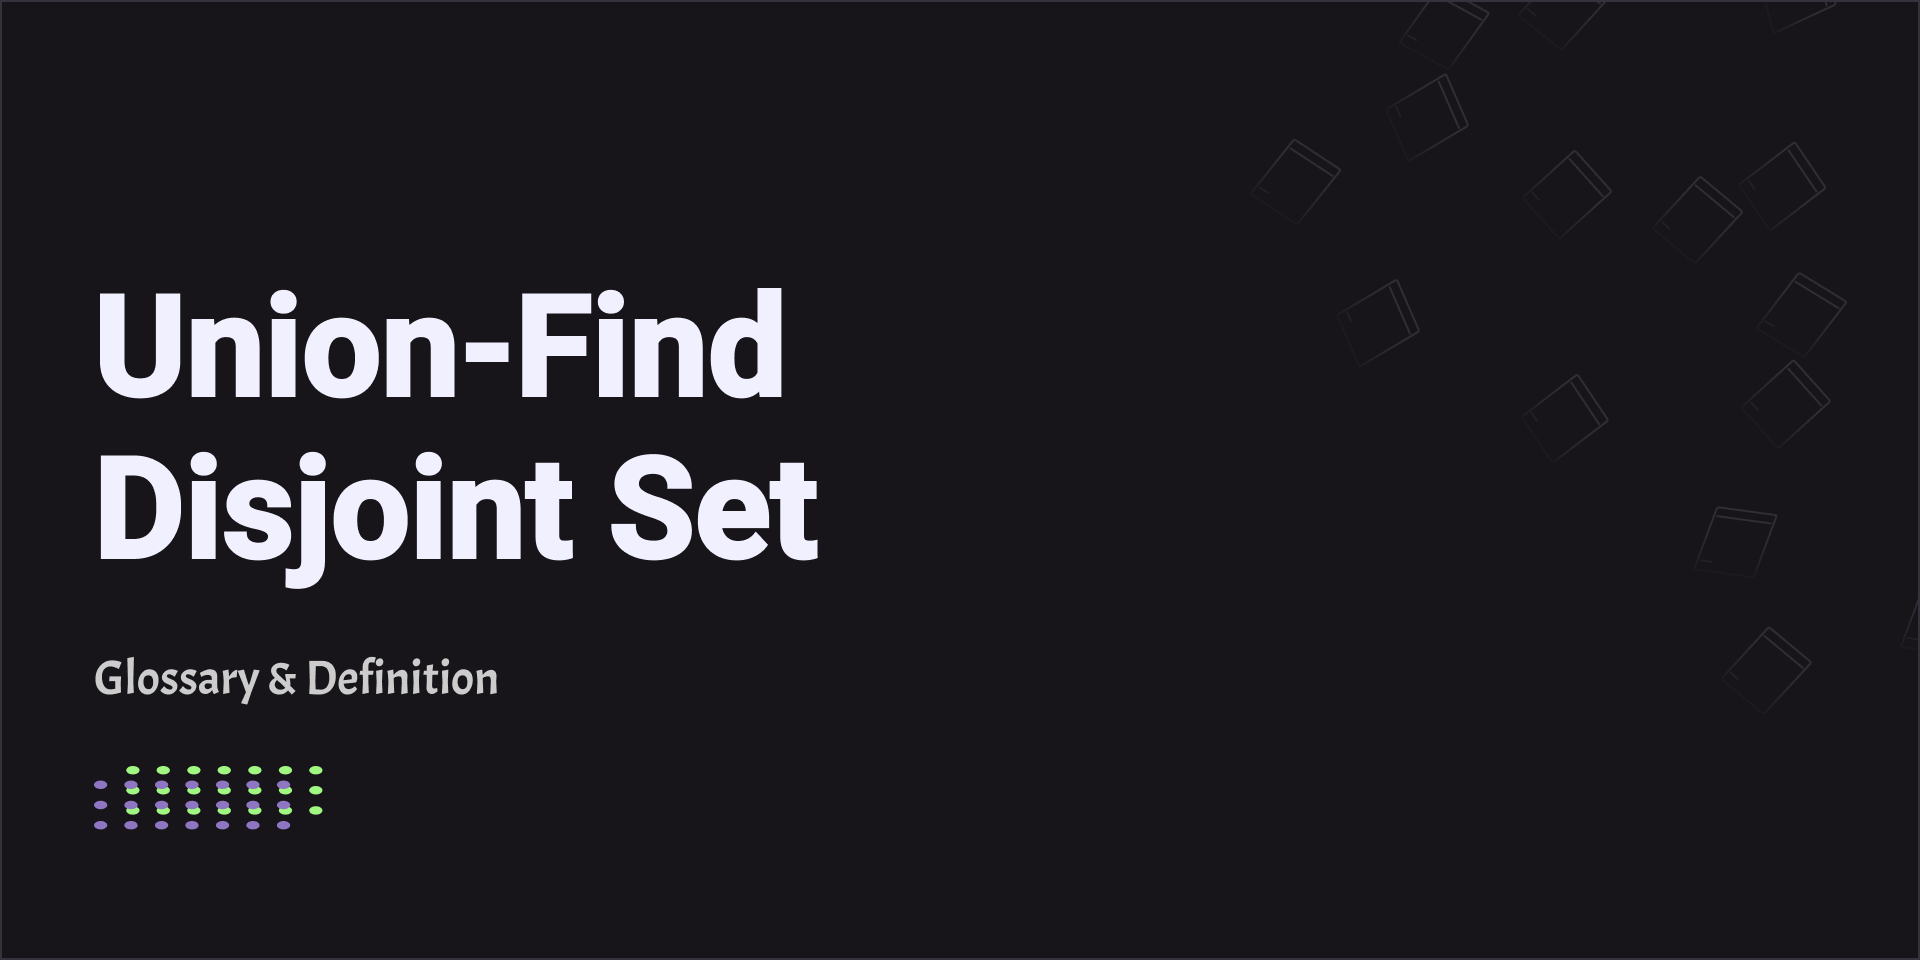 Union-Find Disjoint Set